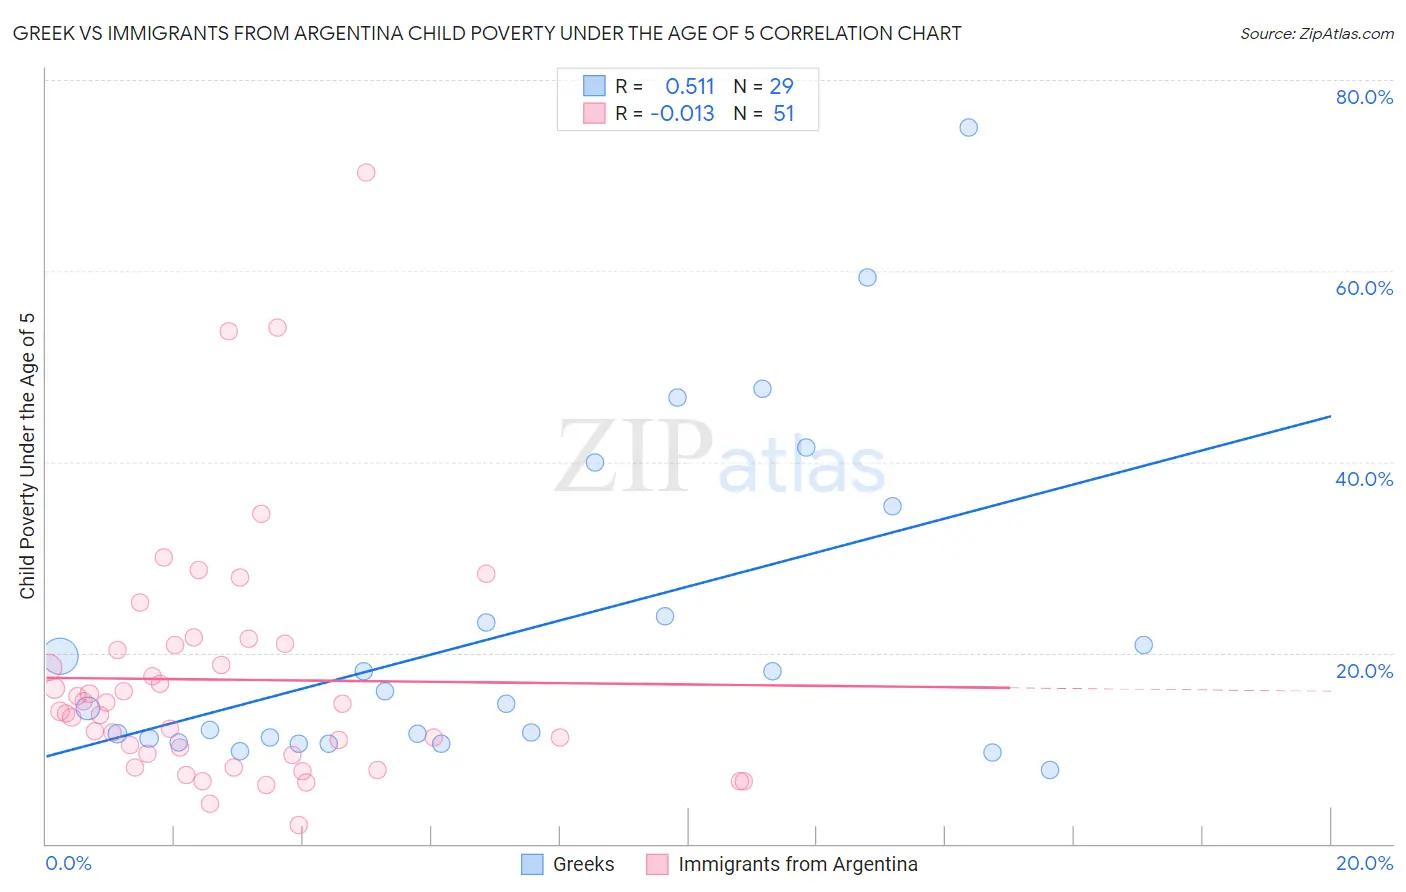 Greek vs Immigrants from Argentina Child Poverty Under the Age of 5